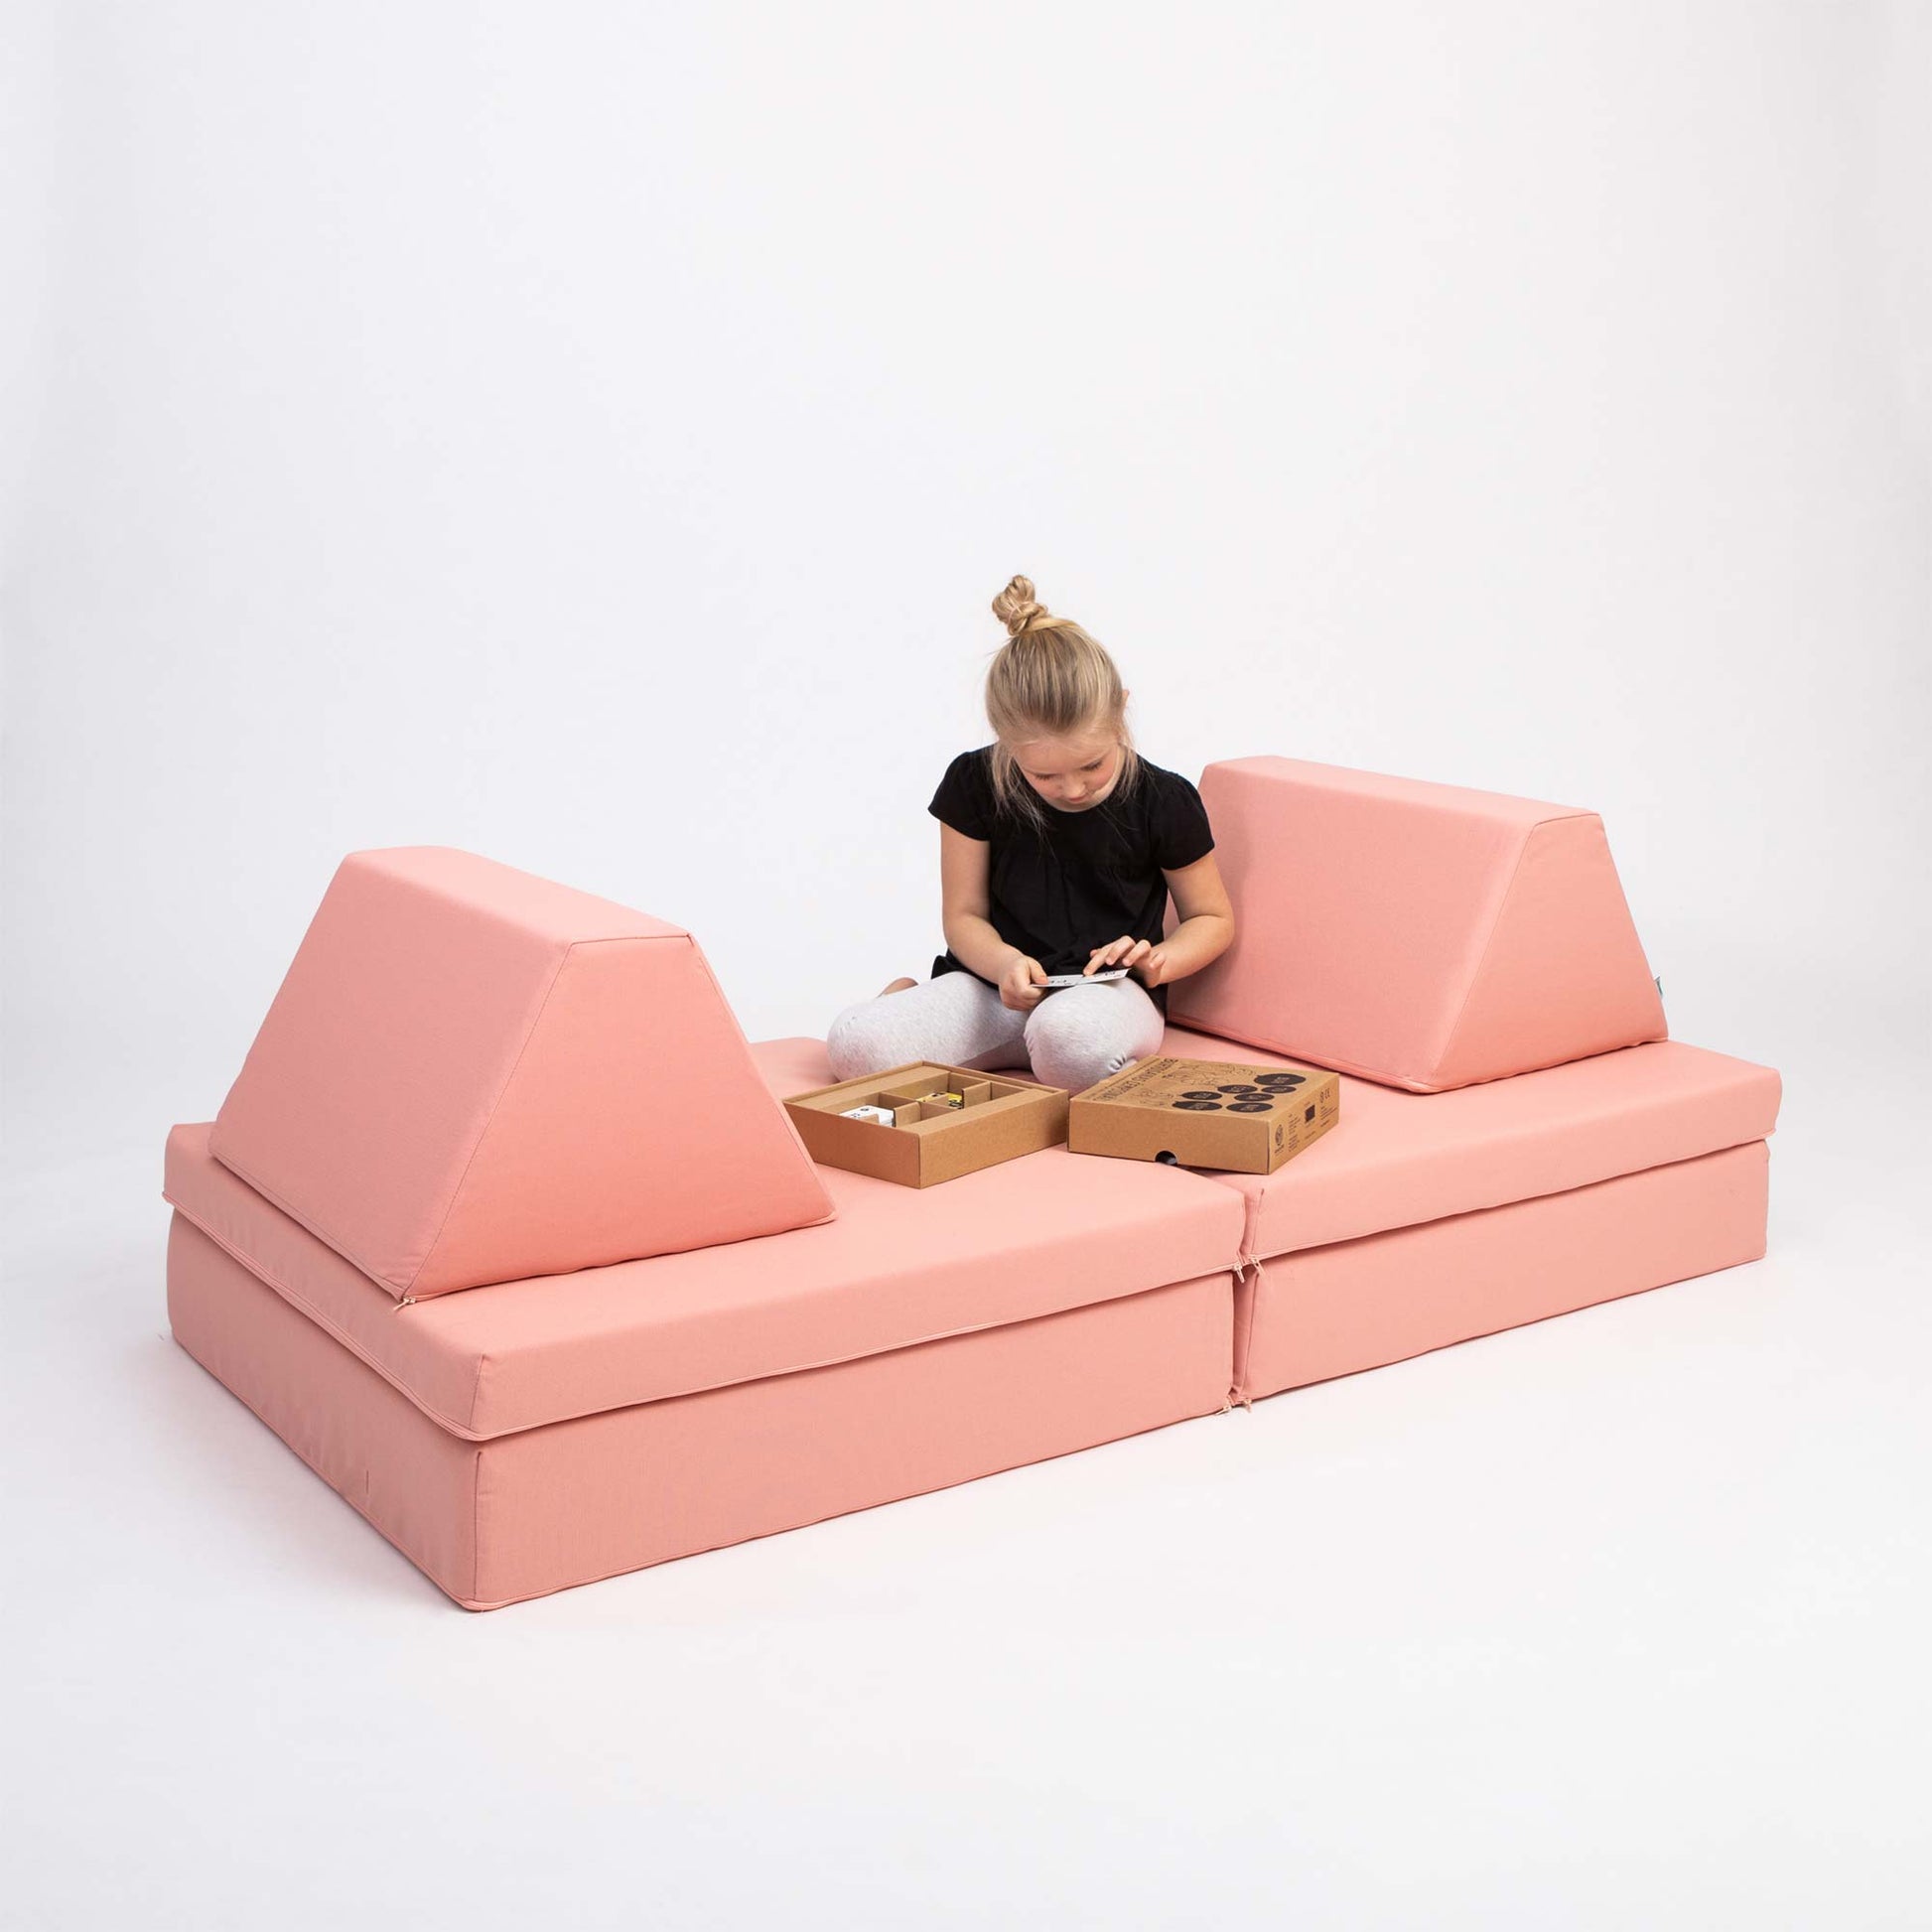 A girl playing with toys while sitting on her salmon pink Monboxy foam playset